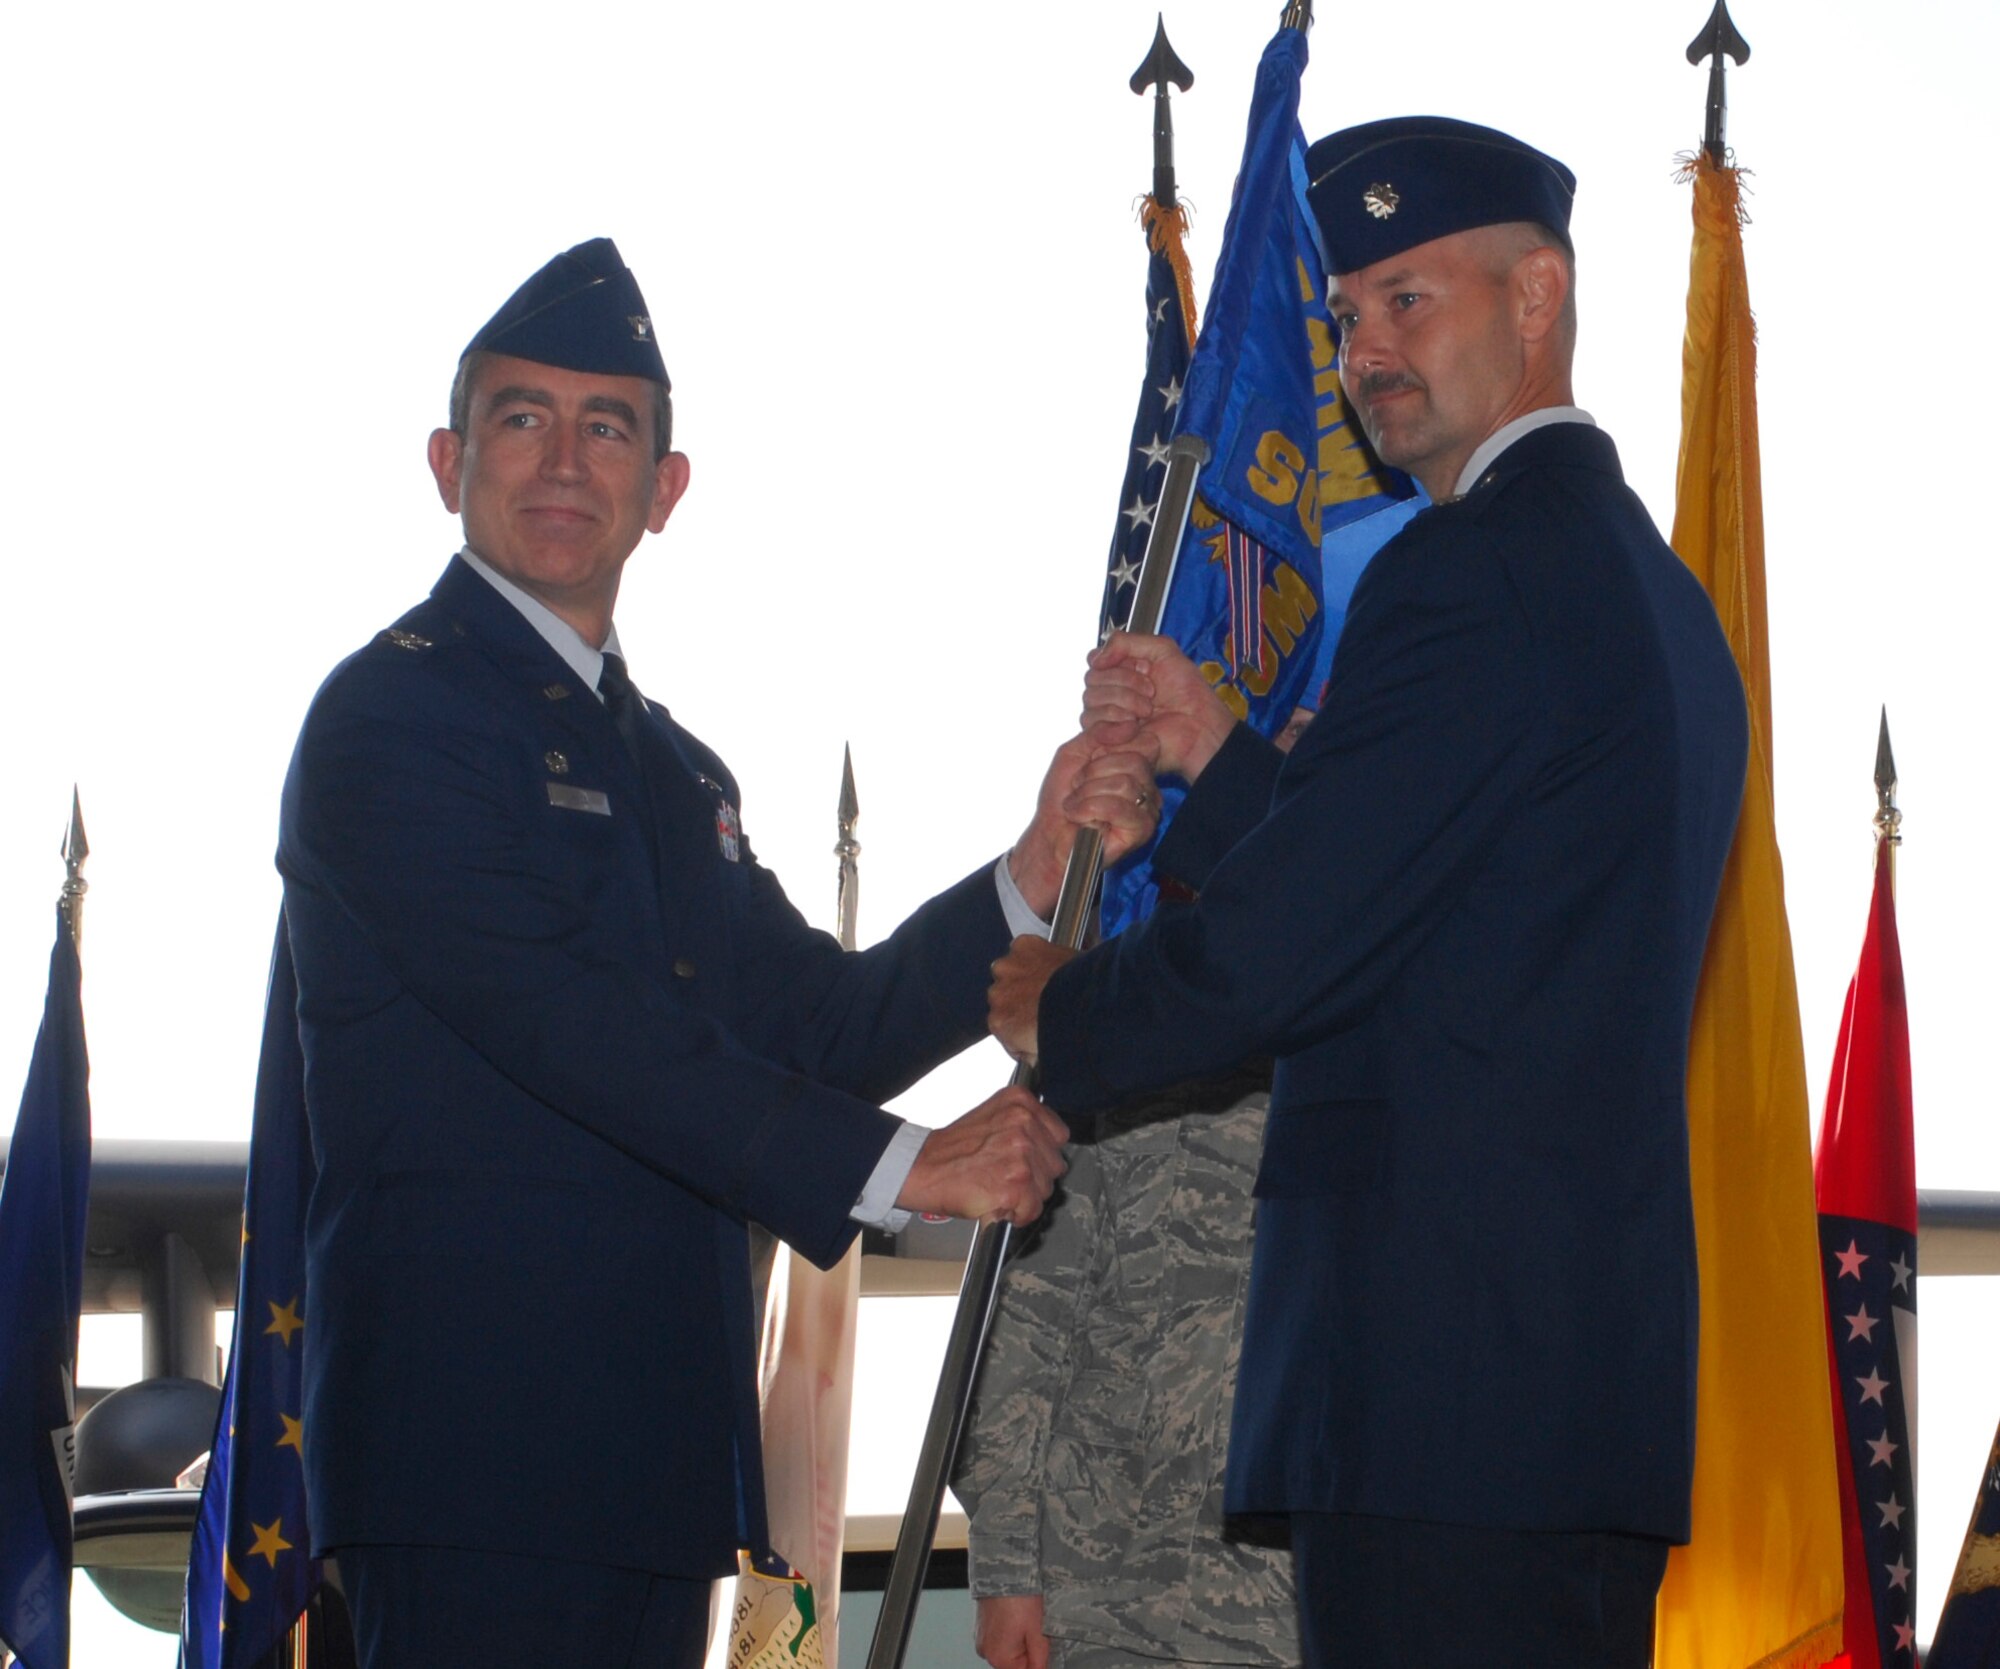 CANNON AIR FORCE BASE, N.M. - Lt. Col. James Reineke assumes command of the 27th Special Operations Medical Operations Squadron from Col. Kenneth Hall, 27th Special Operations Medical Group commander, in a change-of-command ceremony July 1. Col. Maria Buckles relinquished command of the 27th SOMDOS. (U.S. Air Force photo/Airman 1st Class James Bell)